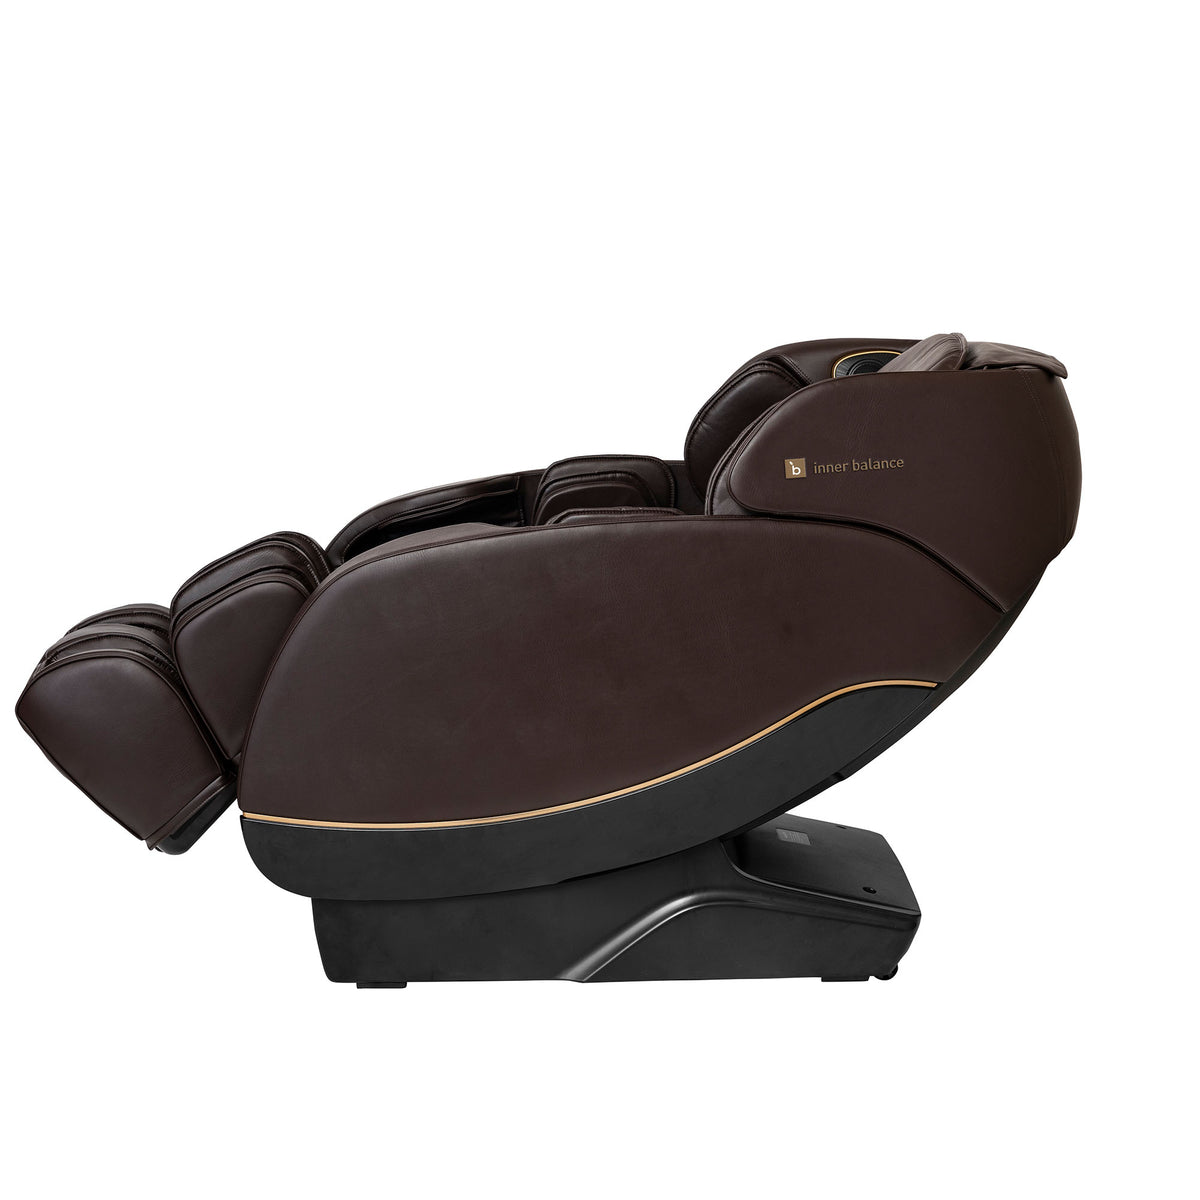 Partially reclined brown leather upholstery on Inner Balance Wellness Jin 2.0 Massage Chair